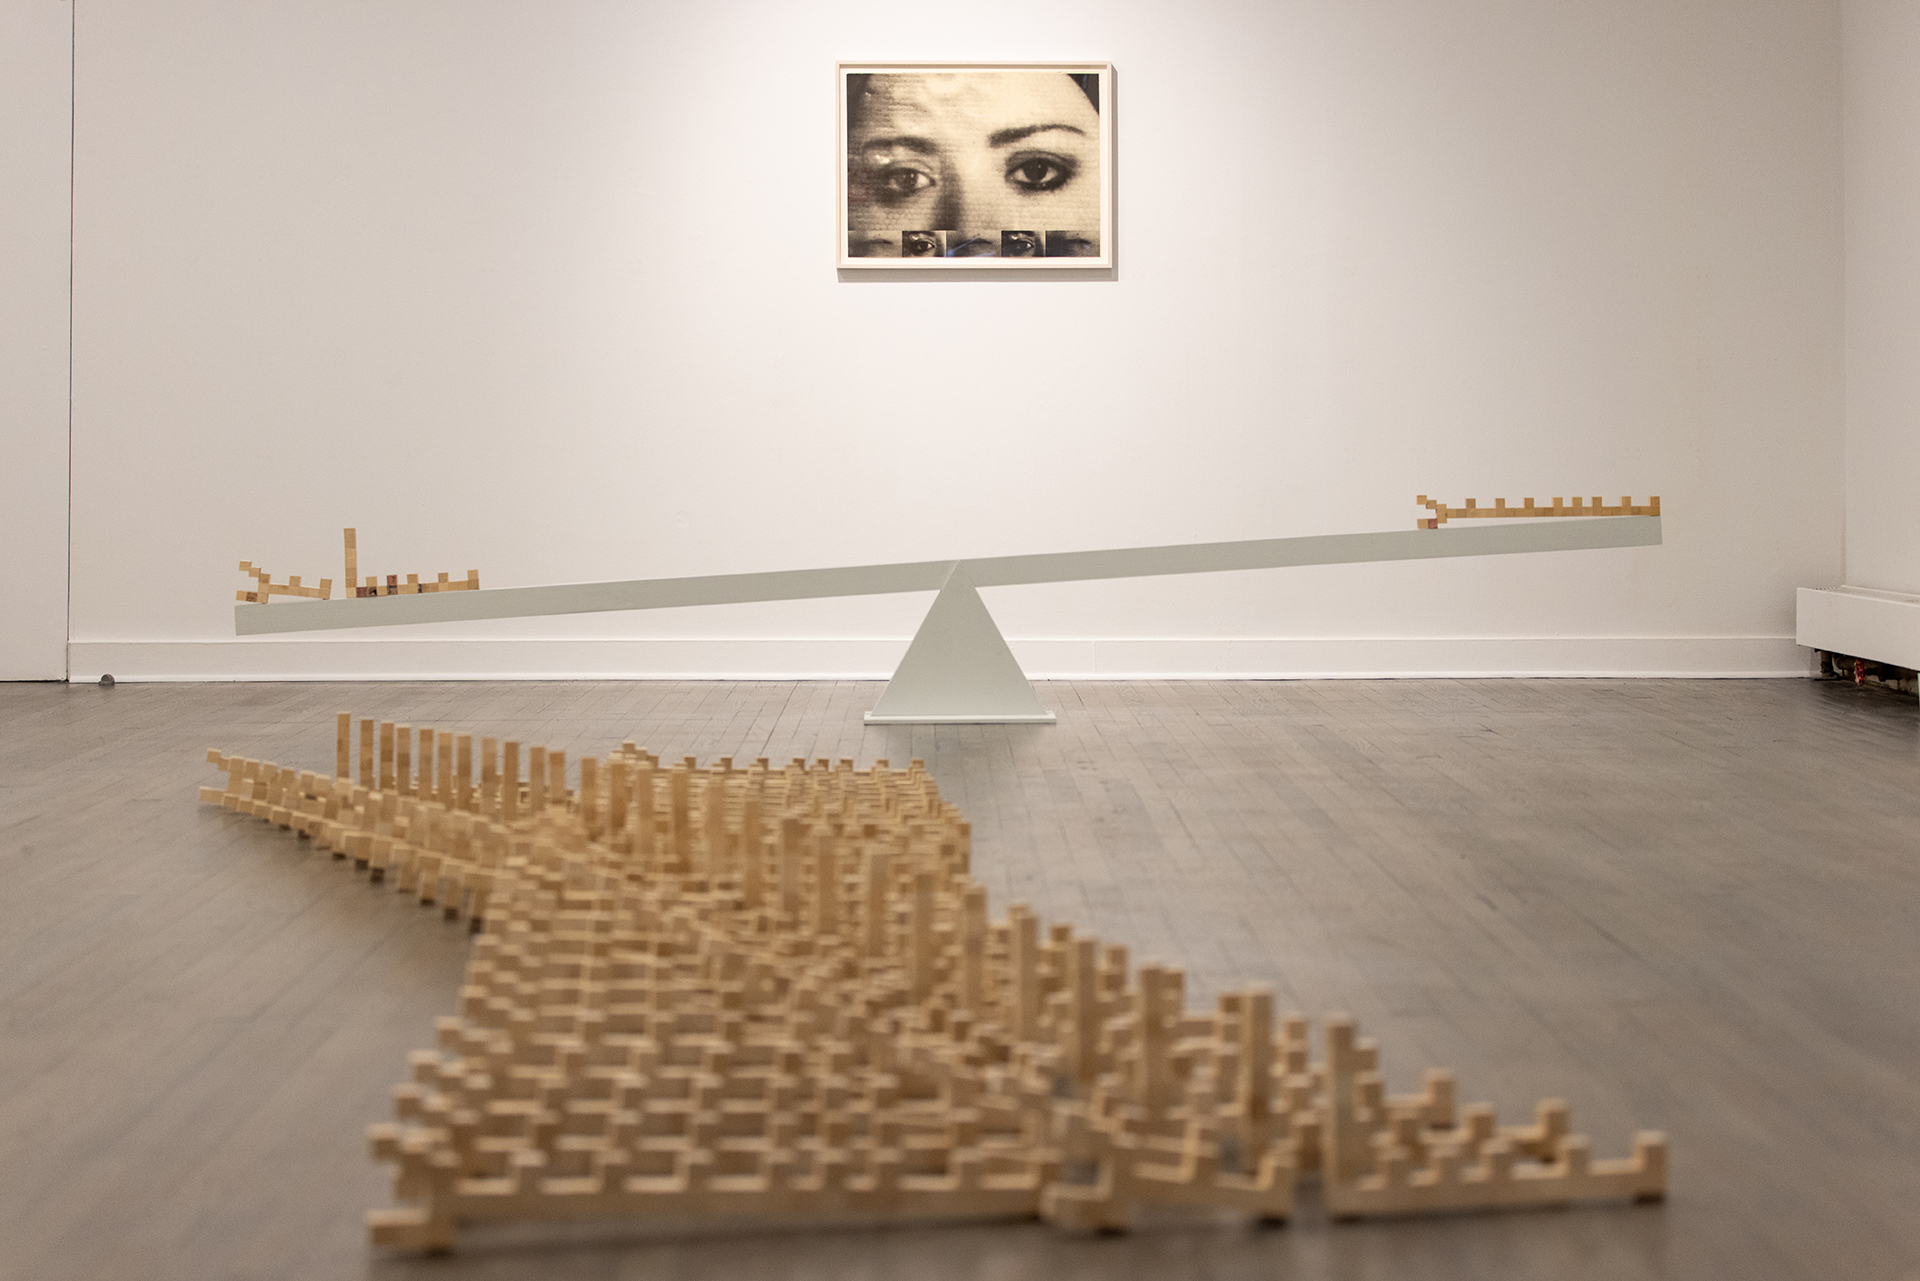 The Arabic words benshinand and benshaanand rendered in wooden blocks sit on either end of a 10' white wooden seesaw. The left word appears slightly heavier.